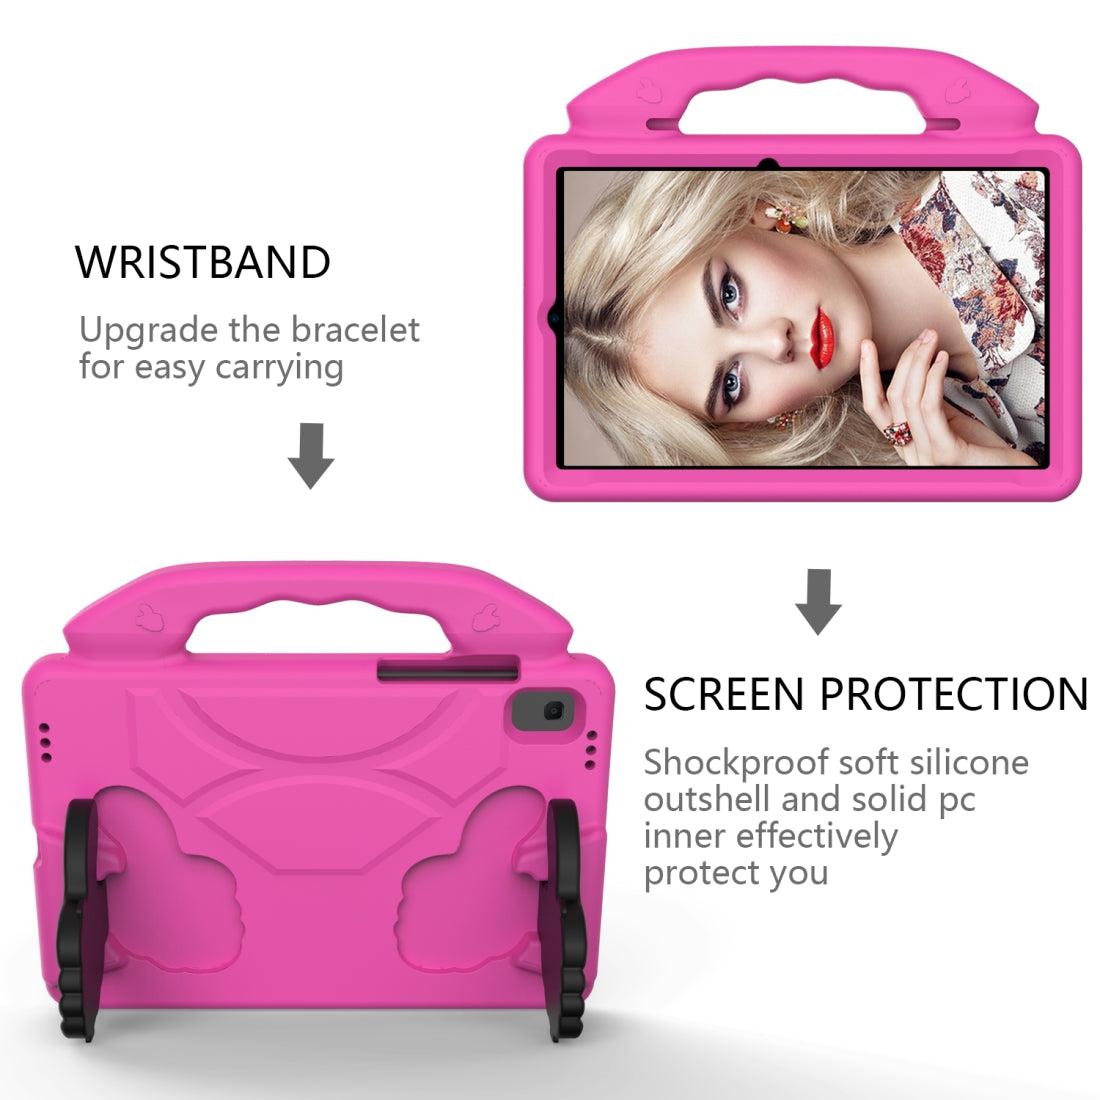 For Samsung Galaxy Tab A7 10.4 2020 Kids Friendly Case Shockproof Cover With Thumbs Up - Pink-Samsung Tablet Cases & Covers-First Help Tech